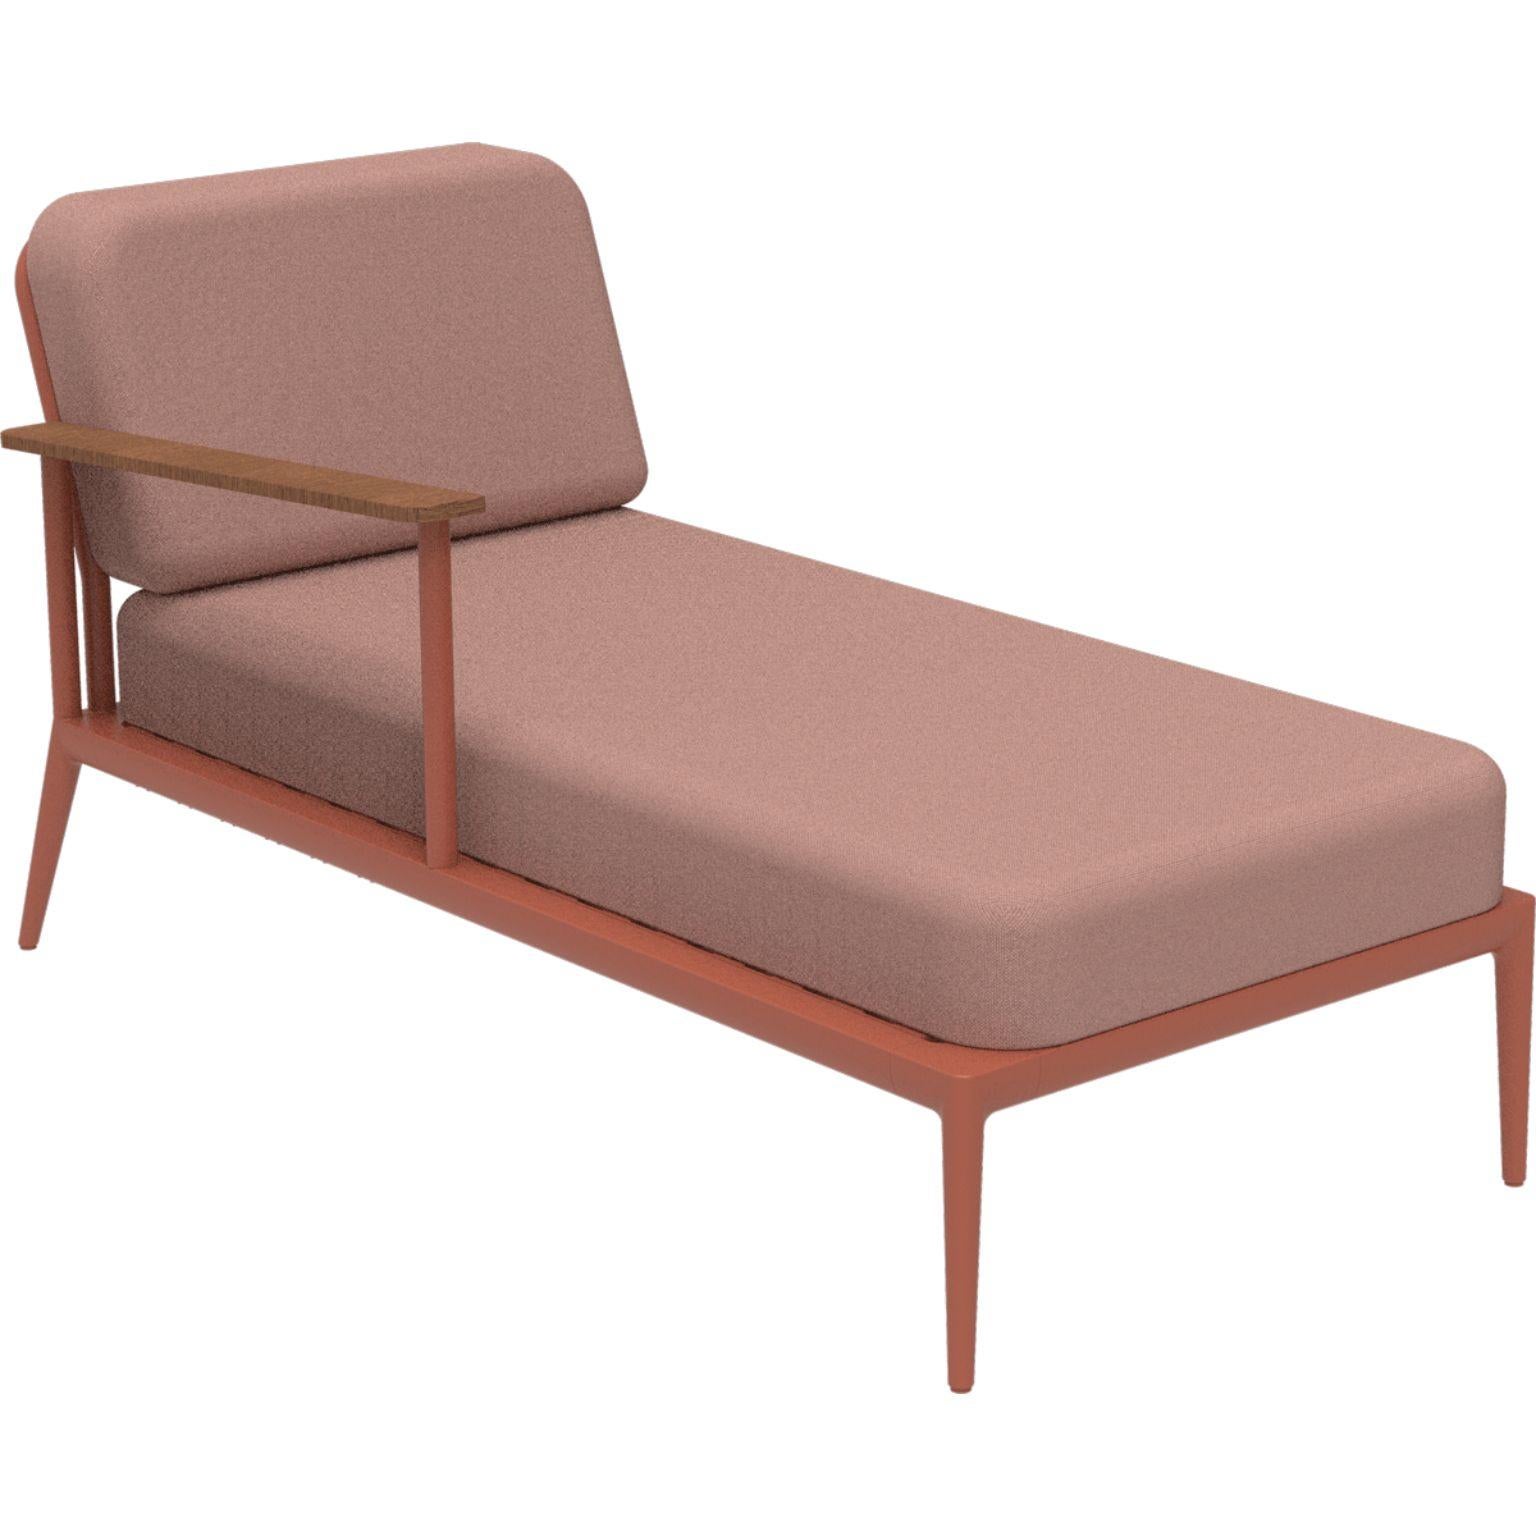 Nature Salmon Right Chaise longue by MOWEE
Dimensions: D155 x W76 x H81 cm (seat height 42 cm).
Material: Aluminum, upholstery and Iroko Wood.
Weight: 28 kg.
Also available in different colors and finishes. 

An unmistakable collection for its